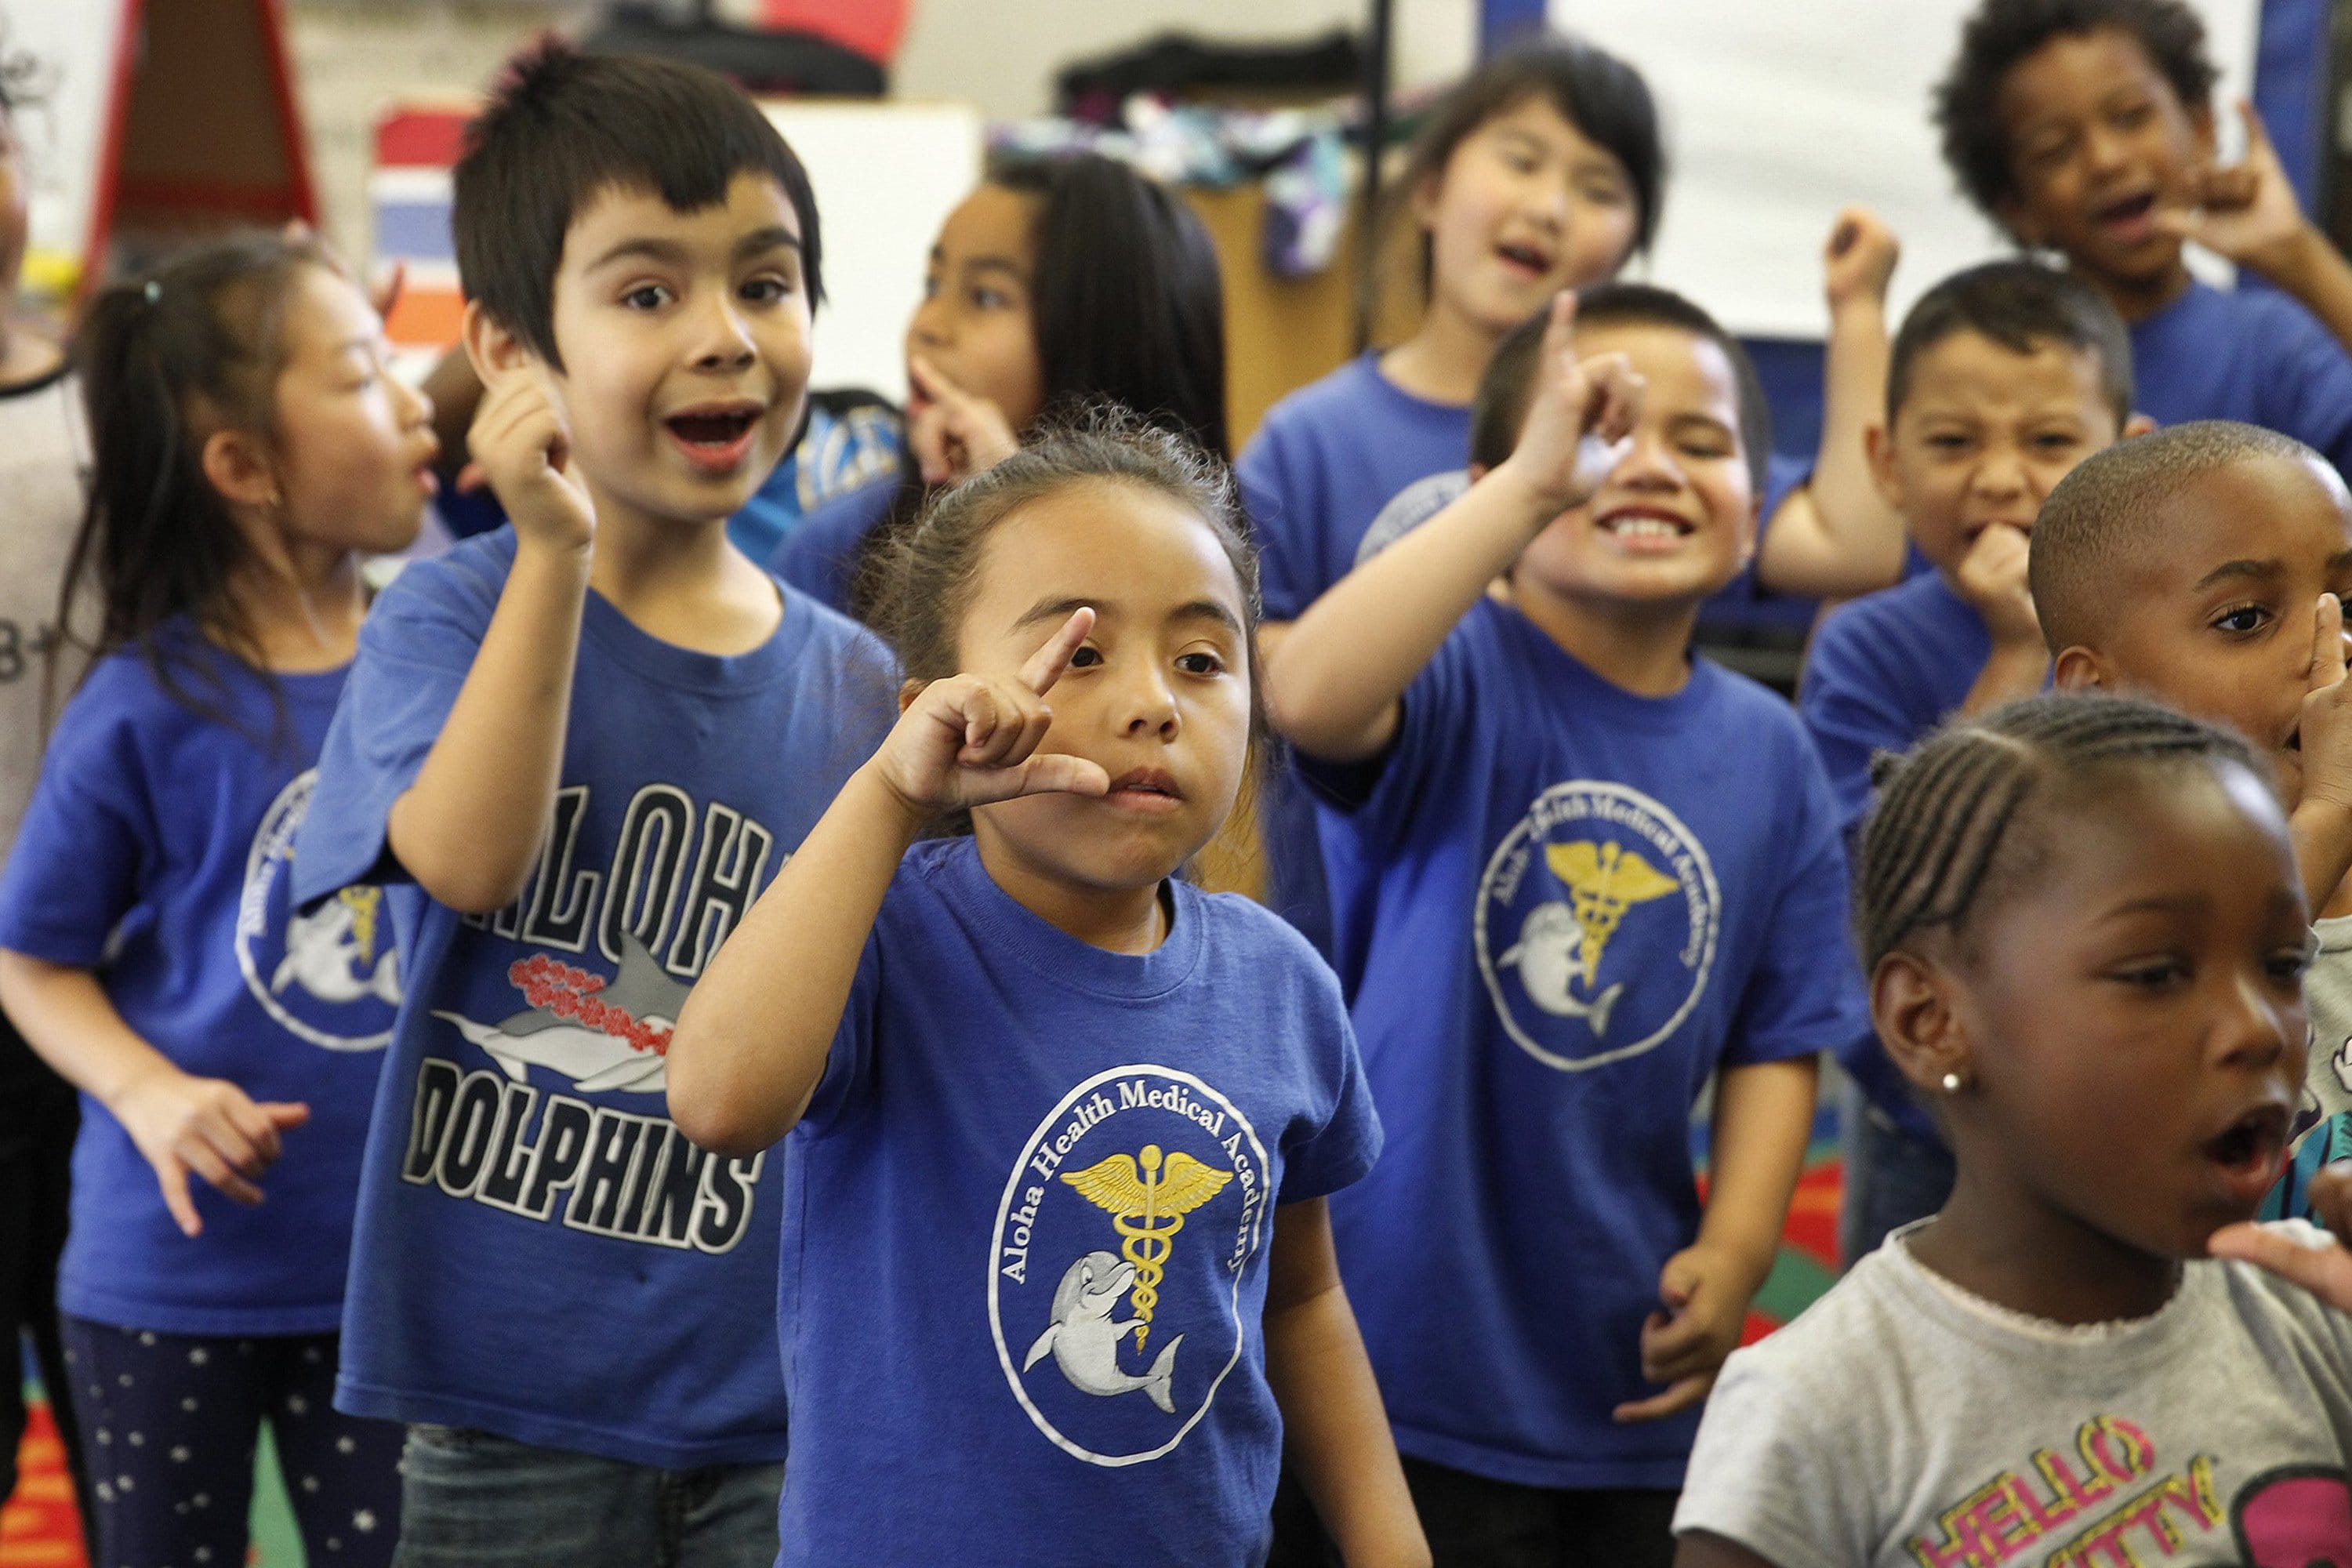 Kindergarten students recite nutrition chants at Aloha Health Medical Academy on April 4 in Lakewood, Calif.